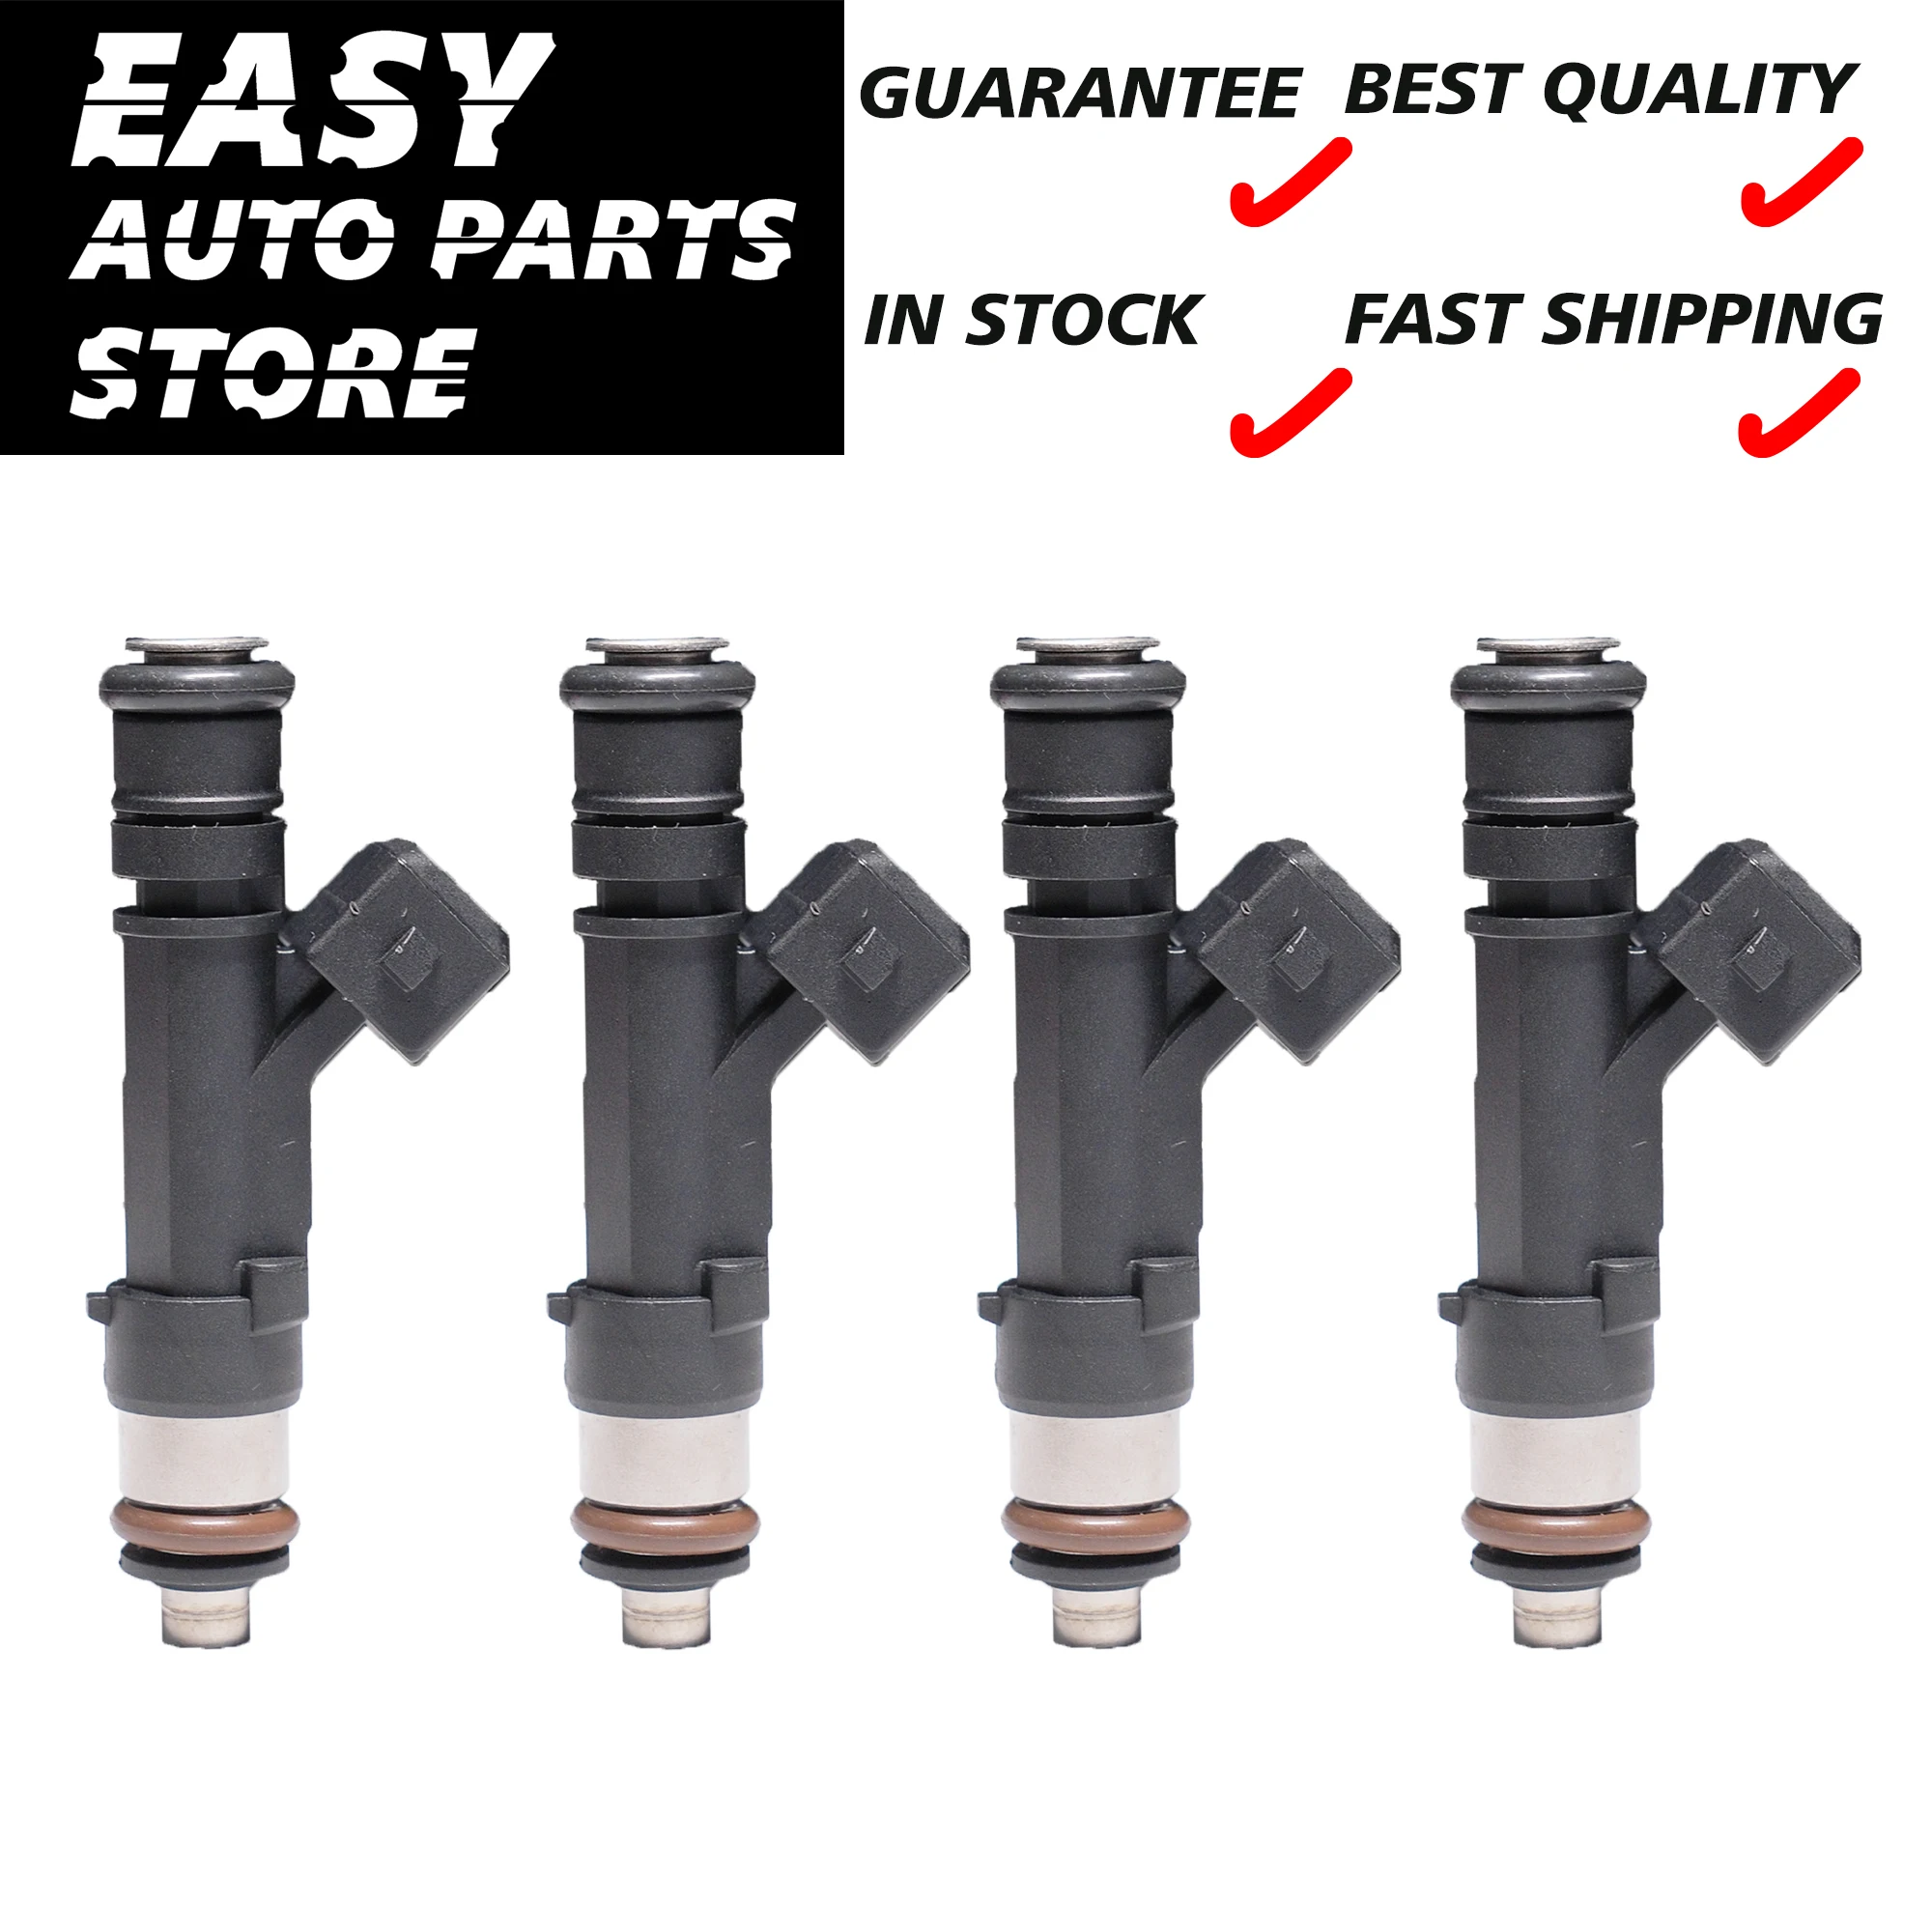 

Fuel Injector,OEM 0280158107,For UAZ 3160 1994 - 2003 Russia Off-road vehicle SUV,Set of 4,2 year warranty,in stock